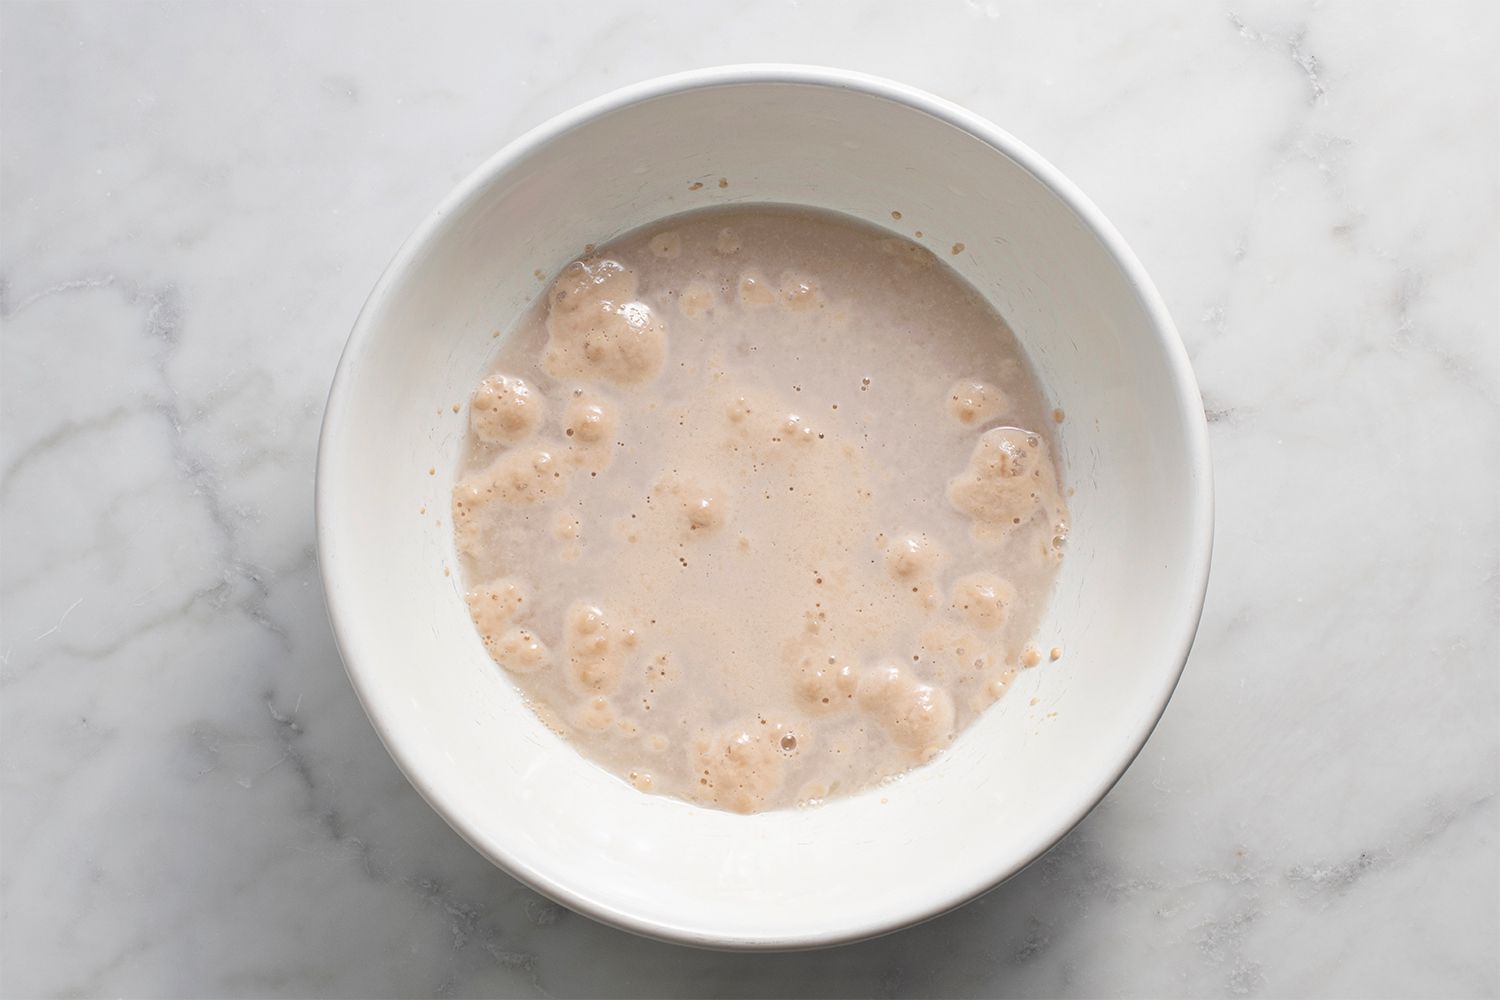 Yeast, sugar and water in a bowl 